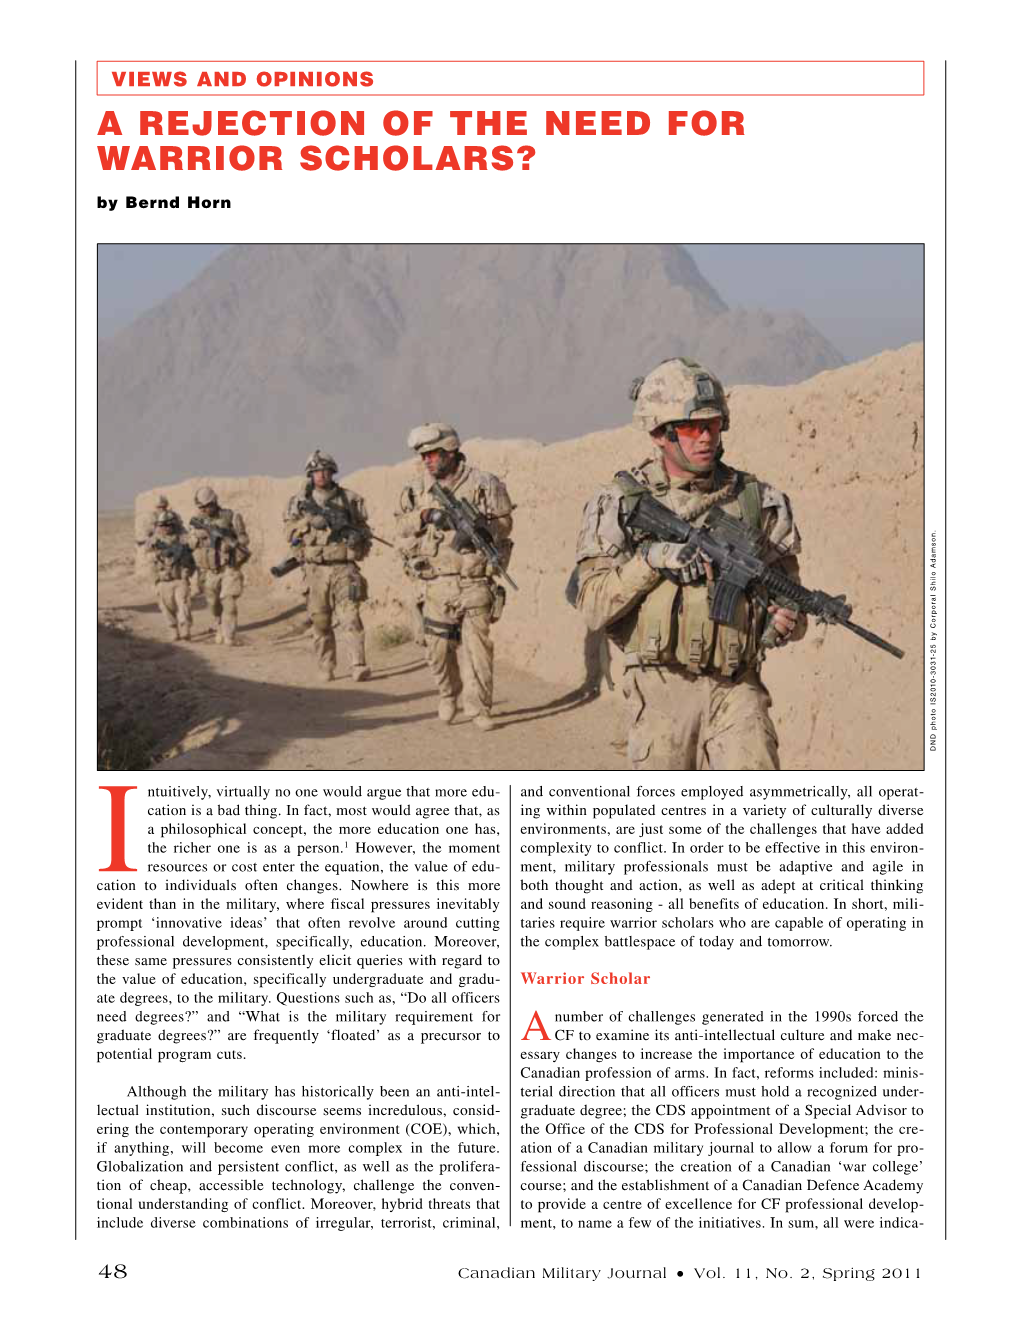 A Rejection of the Need for Warrior Scholars?